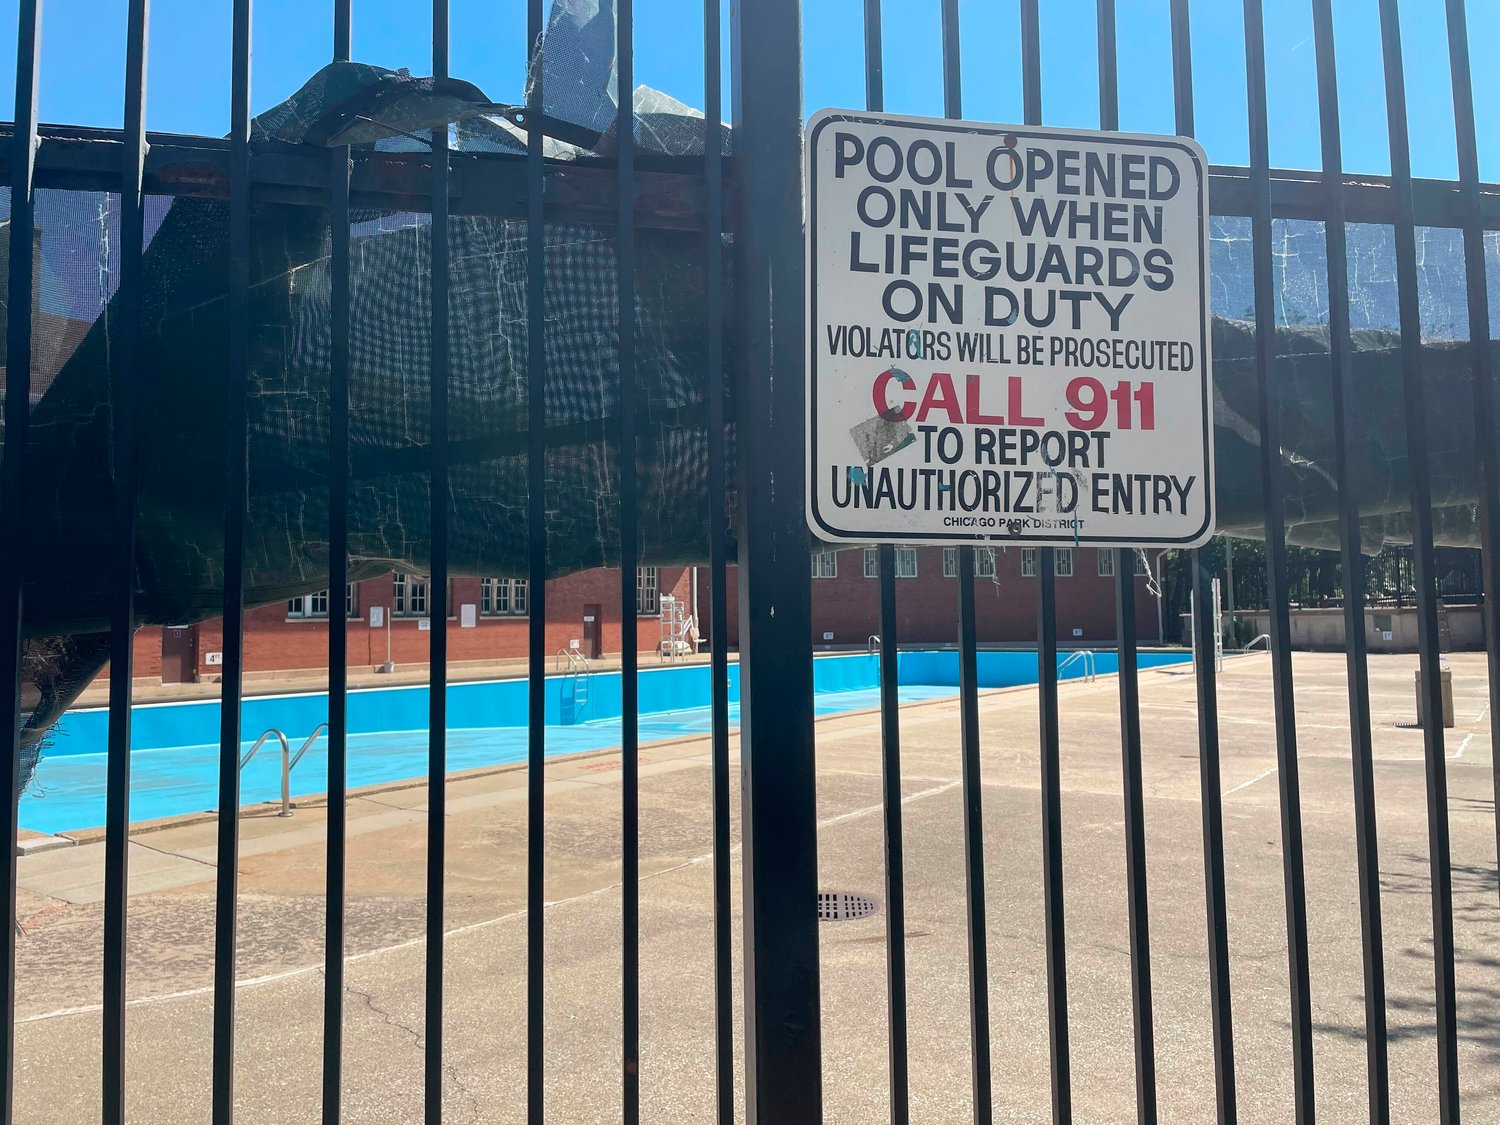 The empty pool at the Hamlin Park Pool remains closed to swimmers in Chicago, Thursday, June 16, 2022. Chicago's public pools will remain closed until July 5, 2022, according to park superintendent and CEO Rosa Escare√±o. The city, like the rest of the U.S., is experiencing a critical shortage of lifeguards and is offering $600 retention bonuses to attract new applicants. (AP Photo/Claire Savage)